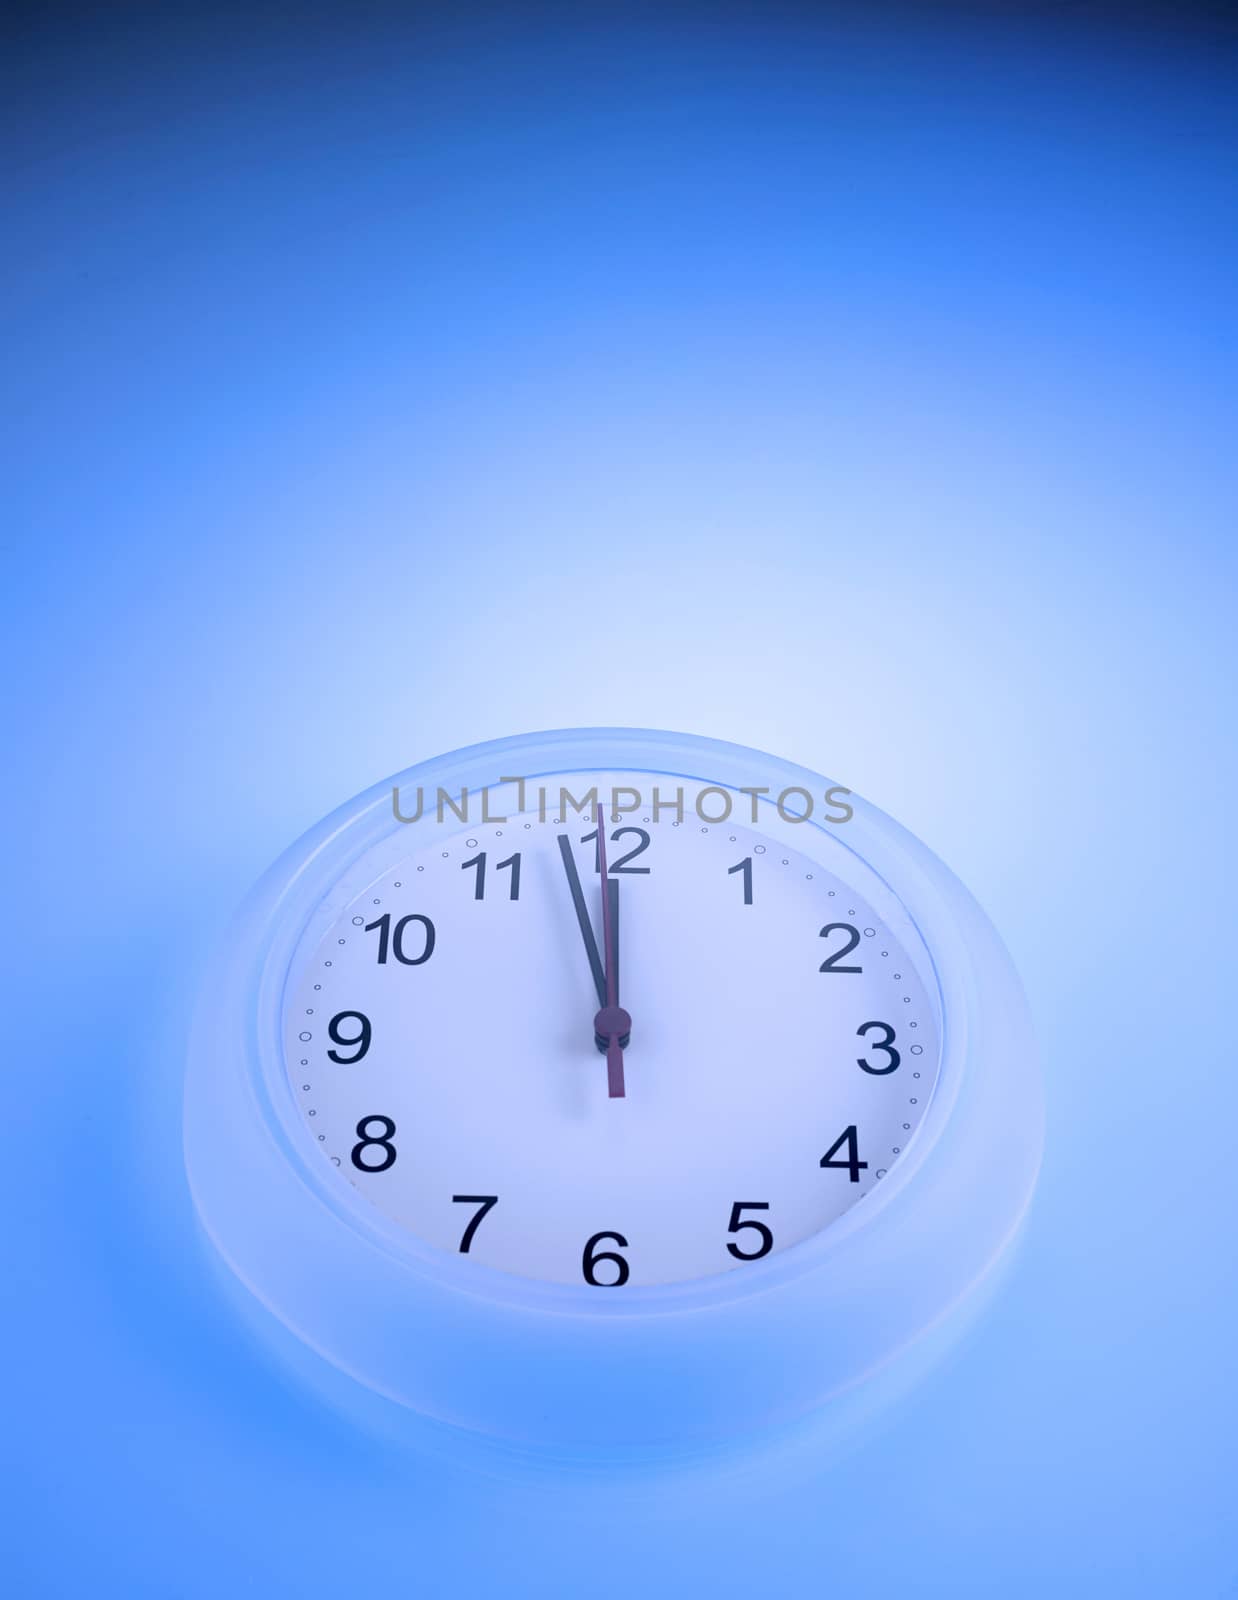 Time shows One Minute to 12